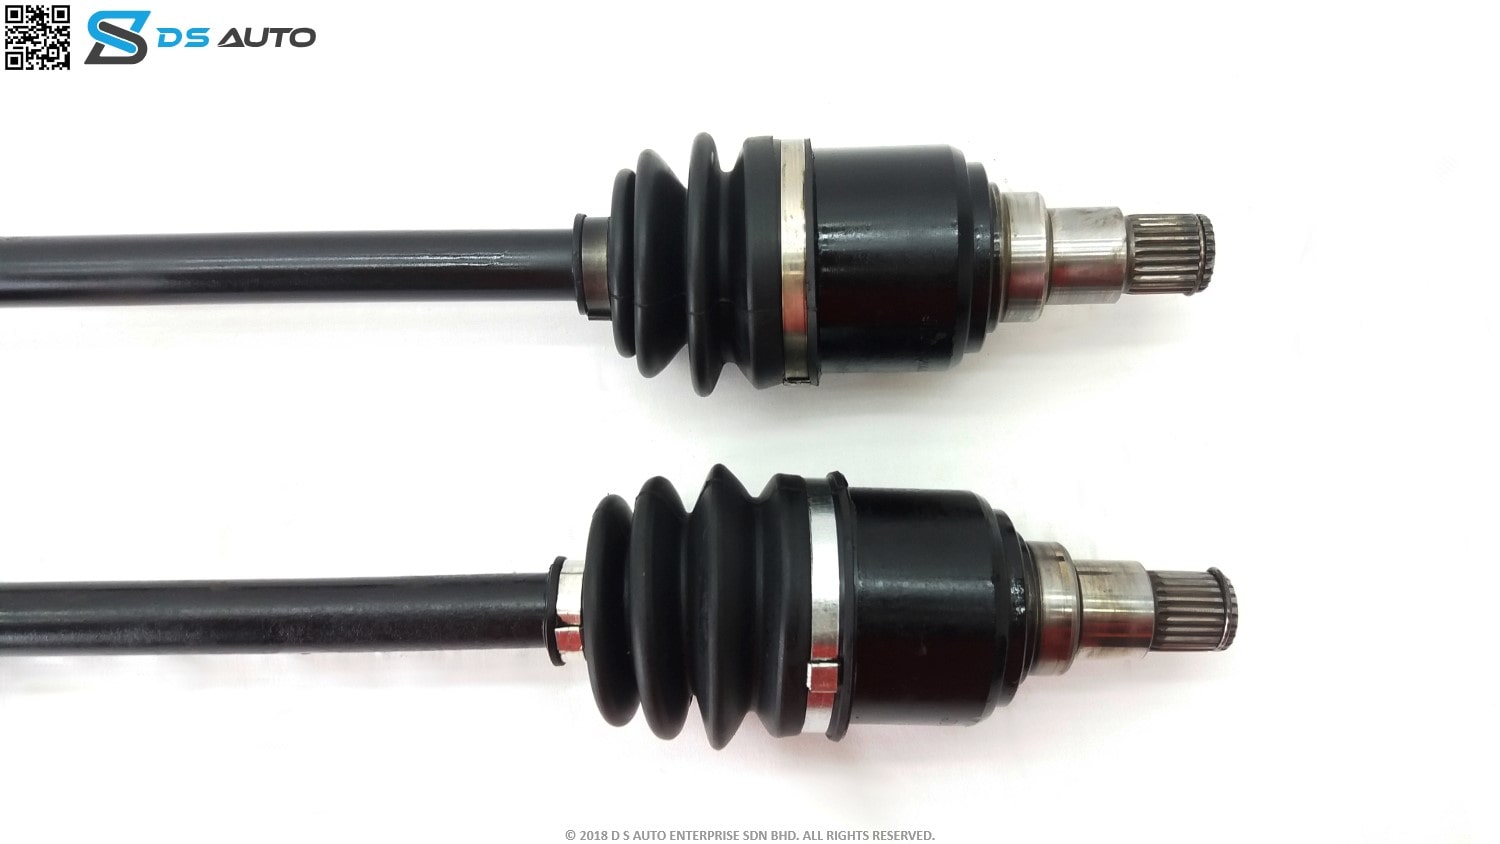 Perodua Kancil Steering Rack - The Exceptionals